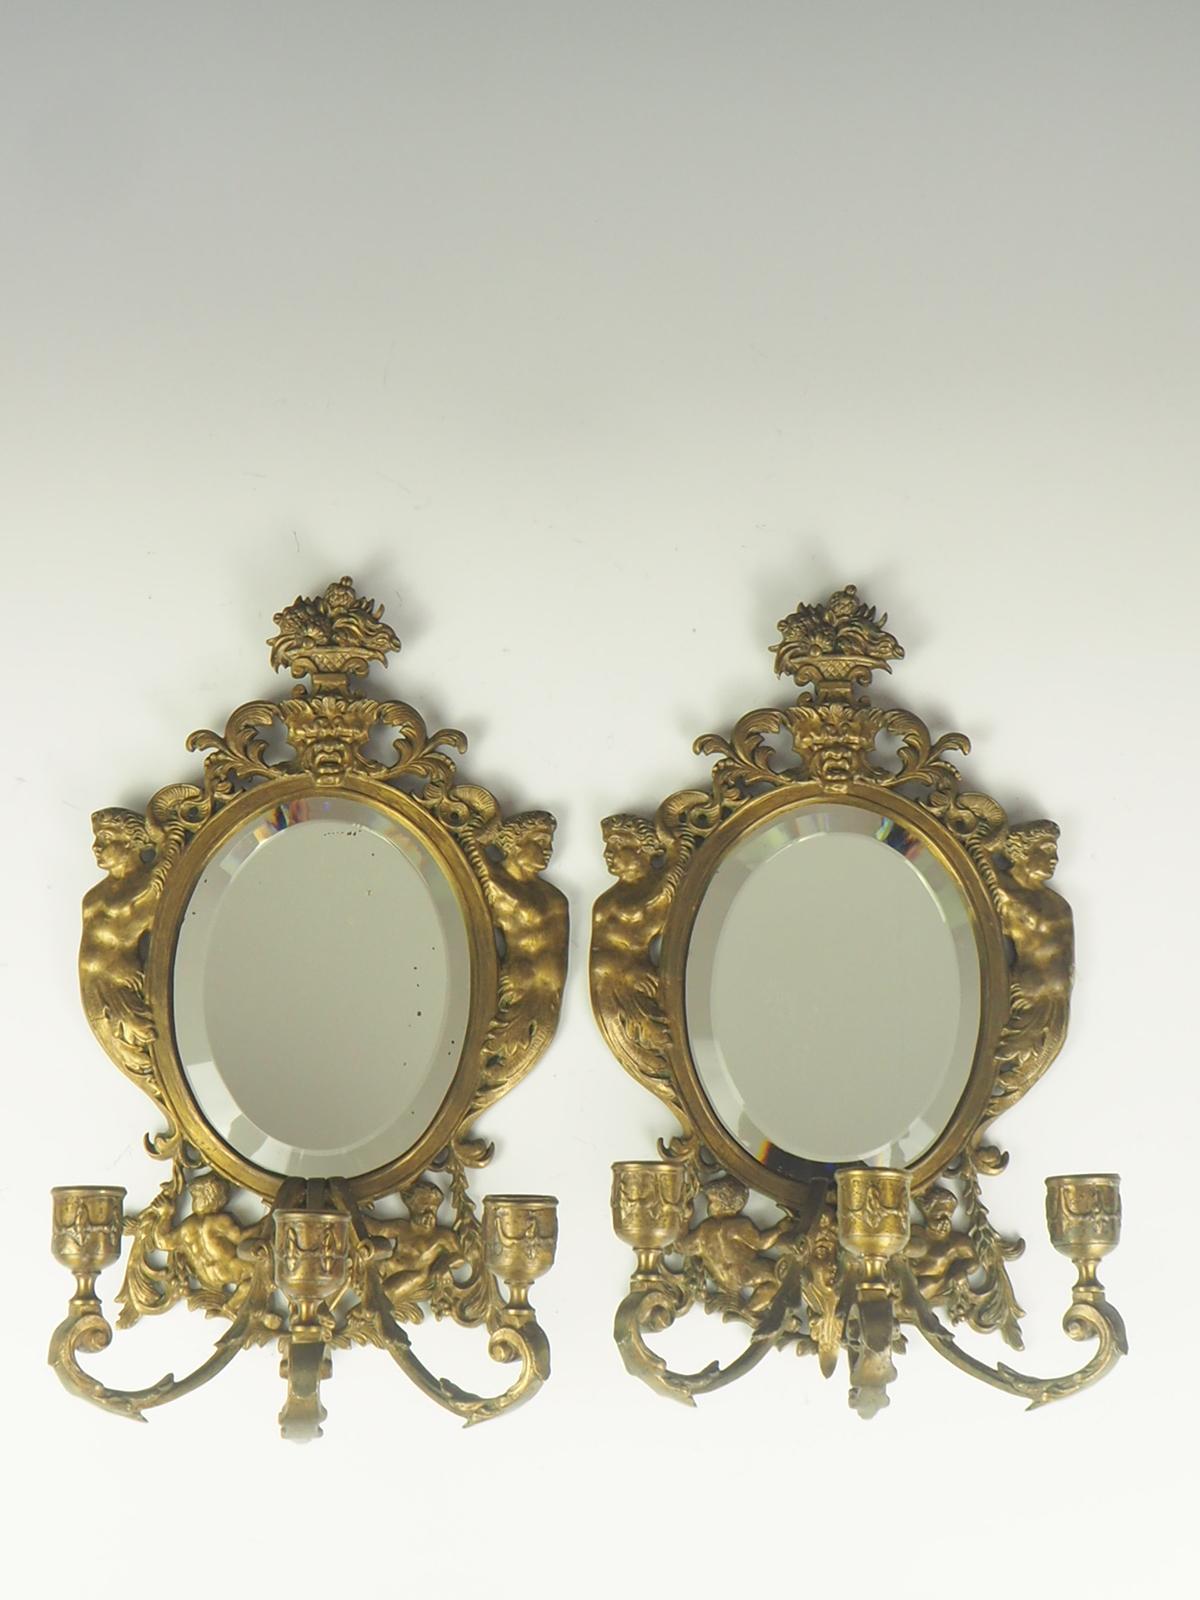 Pair of 19th century 'Girandole' Italian mirrored wall sconces

Very beautiful brass 19th century Italian mirrored wall sconces in original condition with three arm candles.

Bevelled mirrors

A girandole from French, in turn from